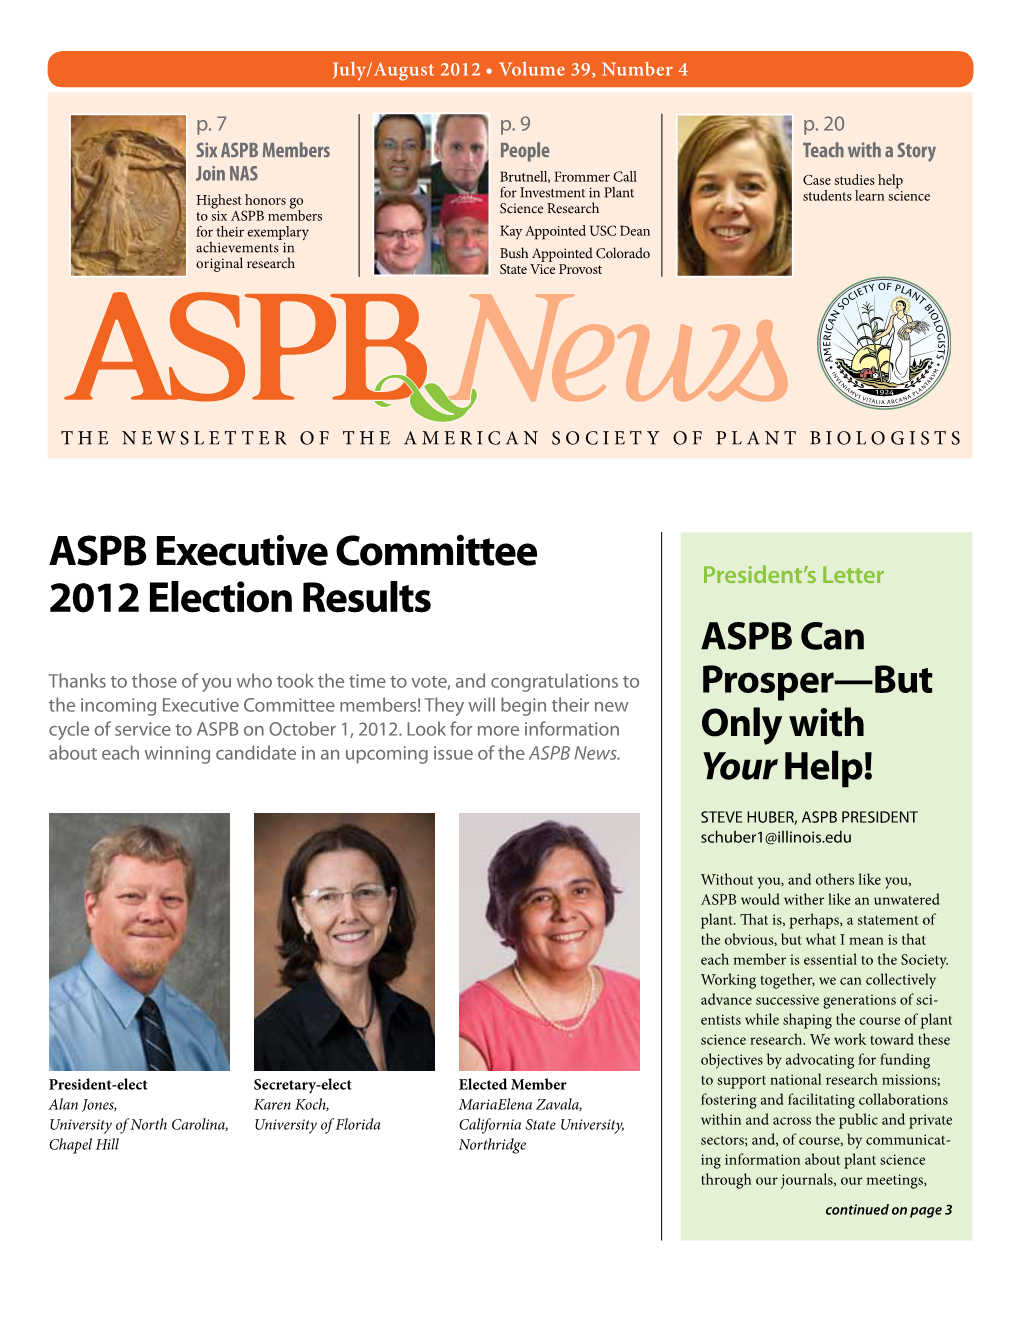 ASPB Executive Committee 2012 Election Results